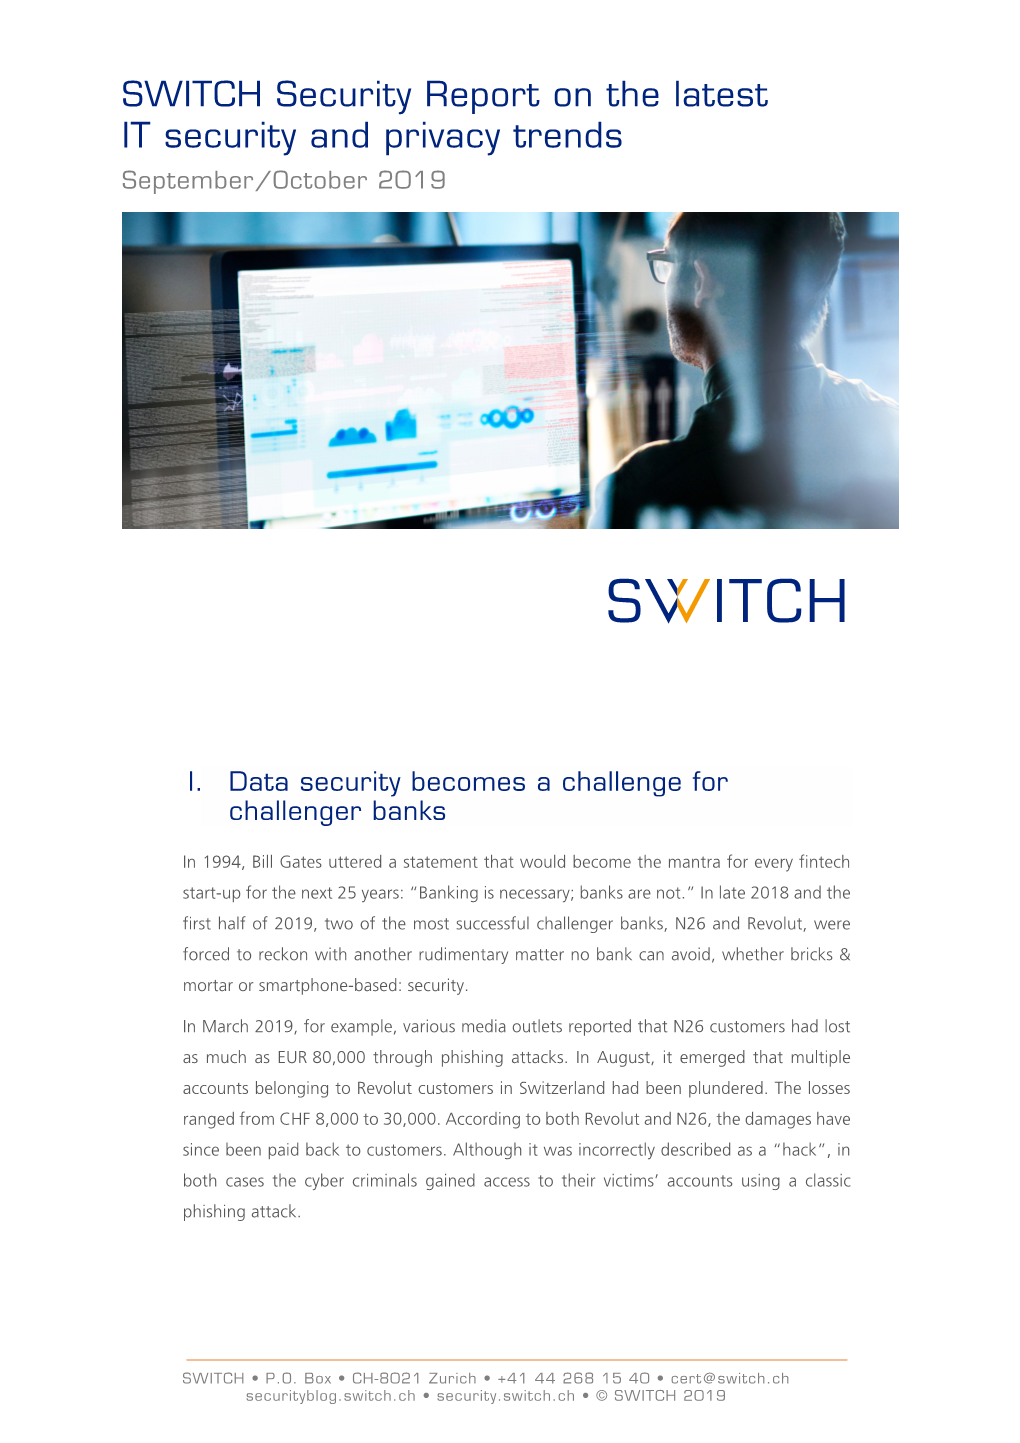 SWITCH Security Report on the Latest IT Security and Privacy Trends September/October 2019